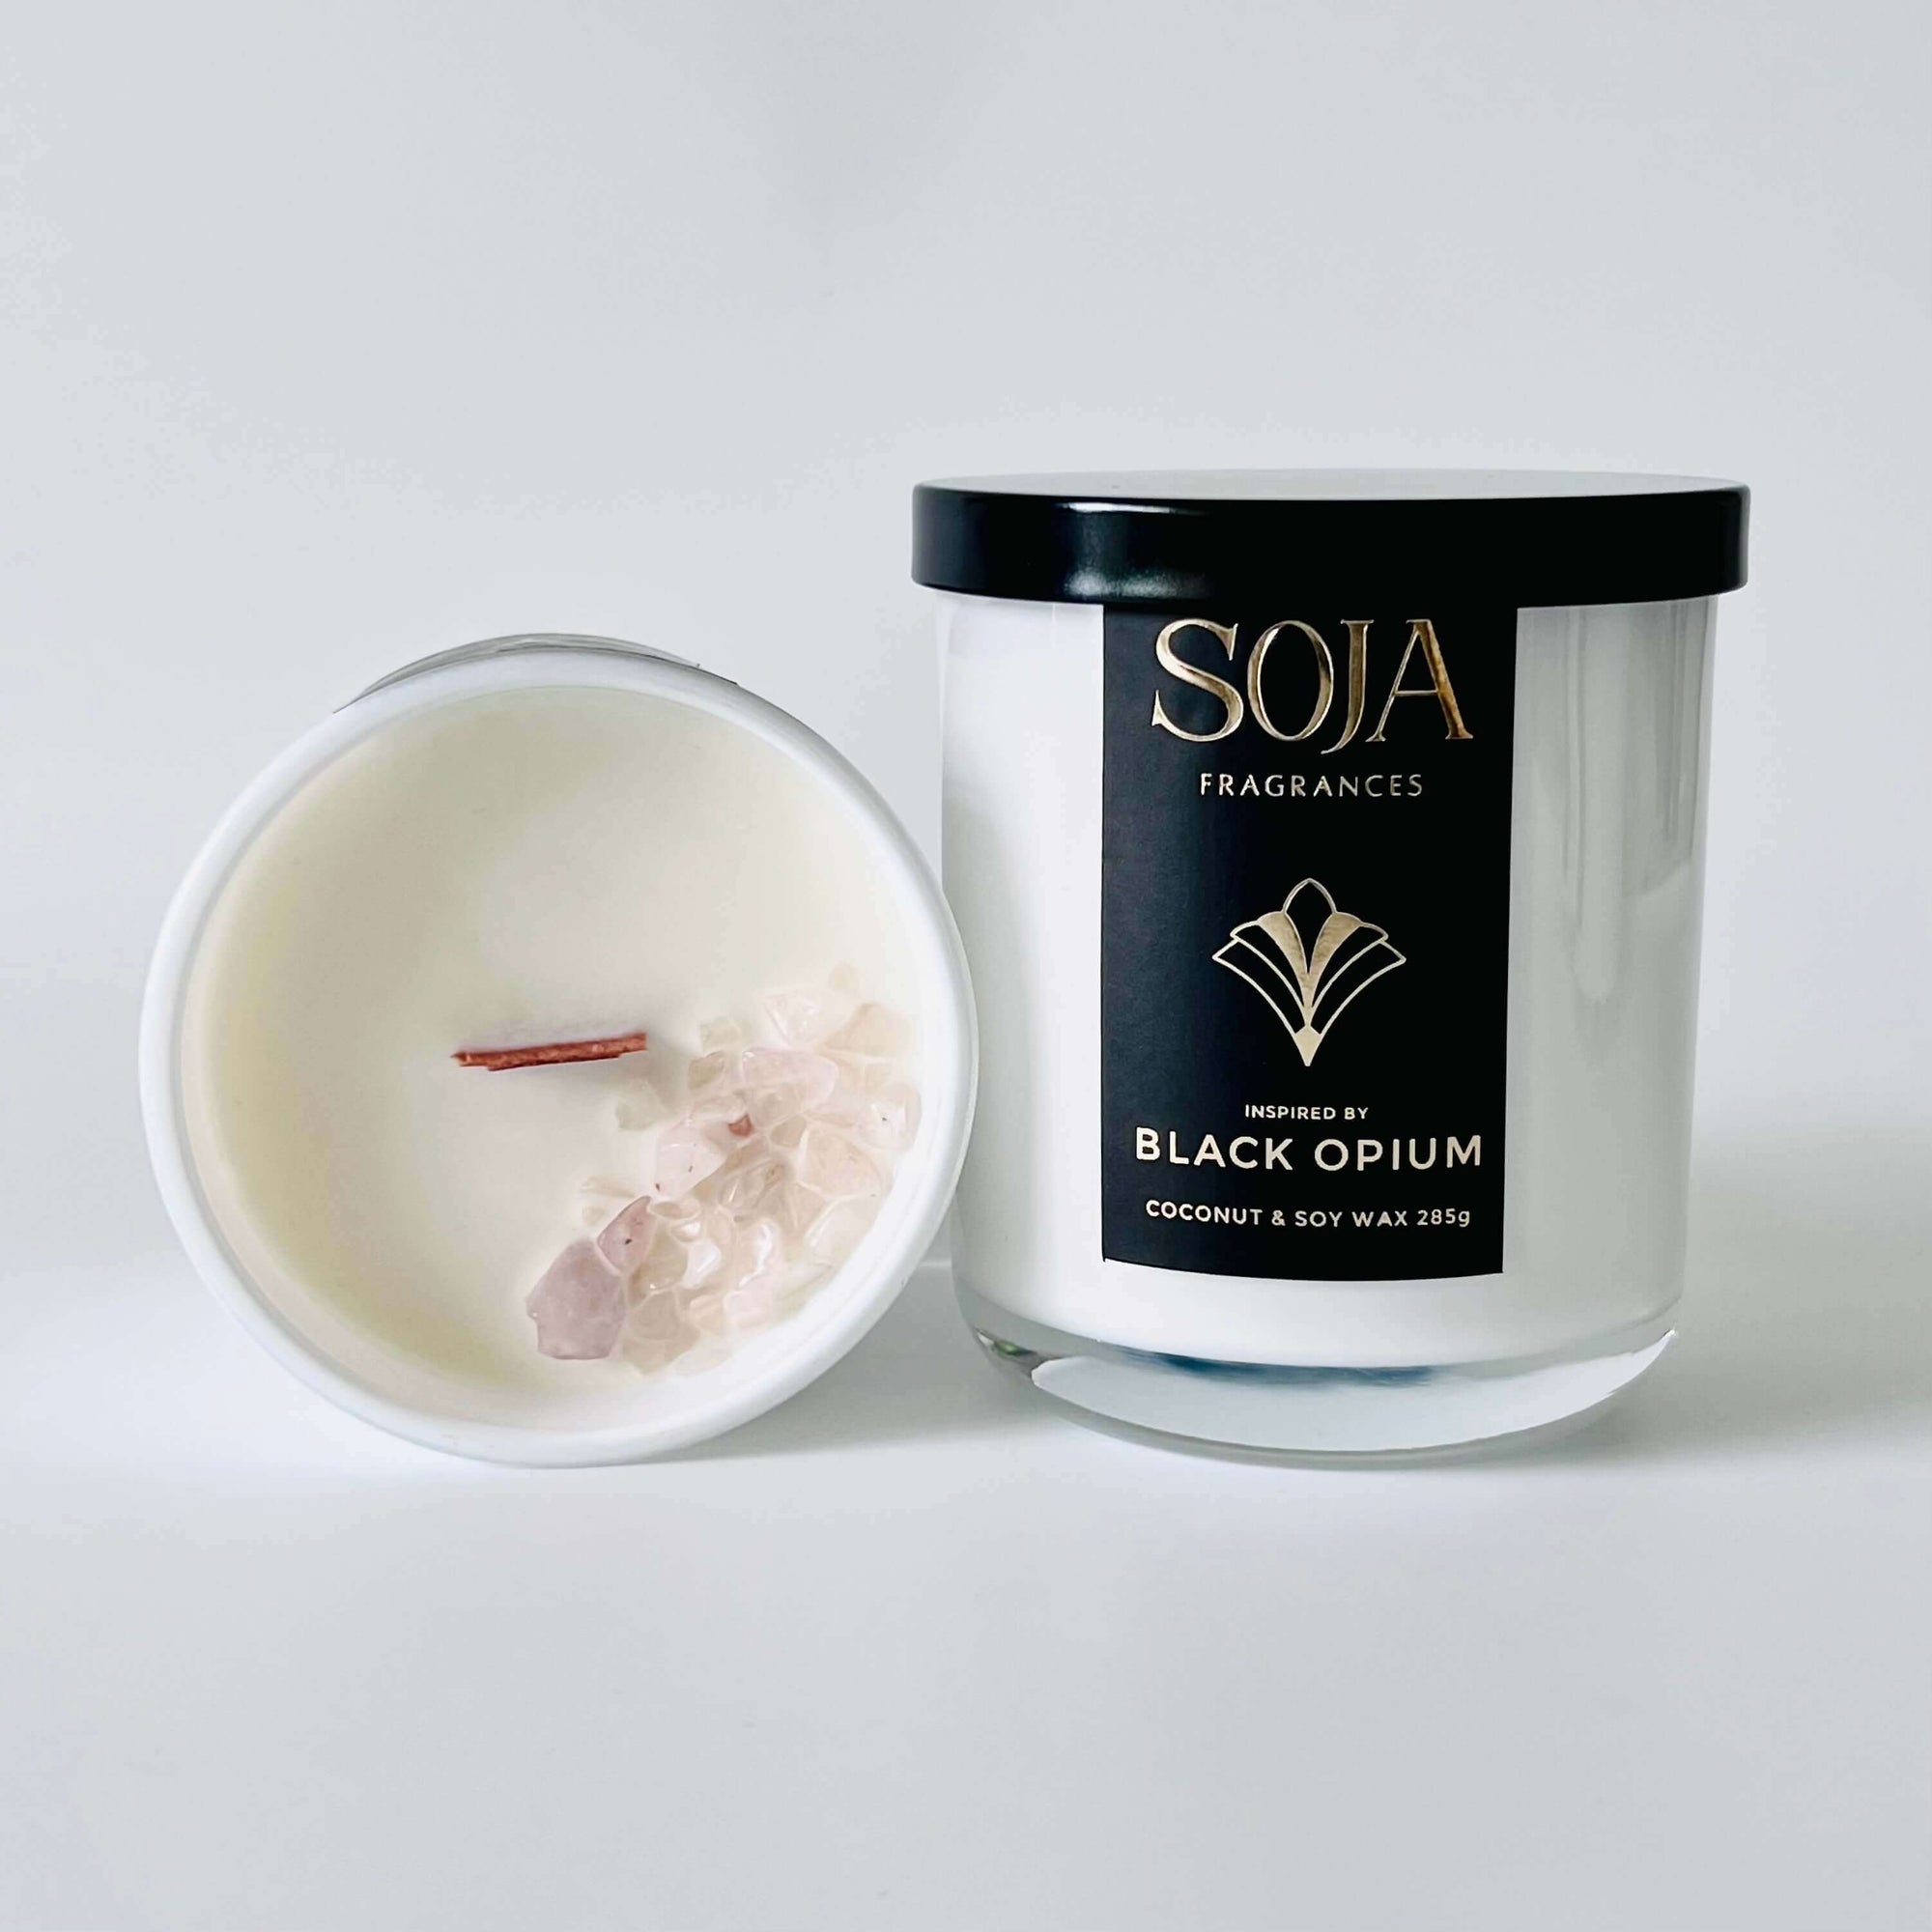 Black opium perfumed candle product photo showing rose quartz crystals